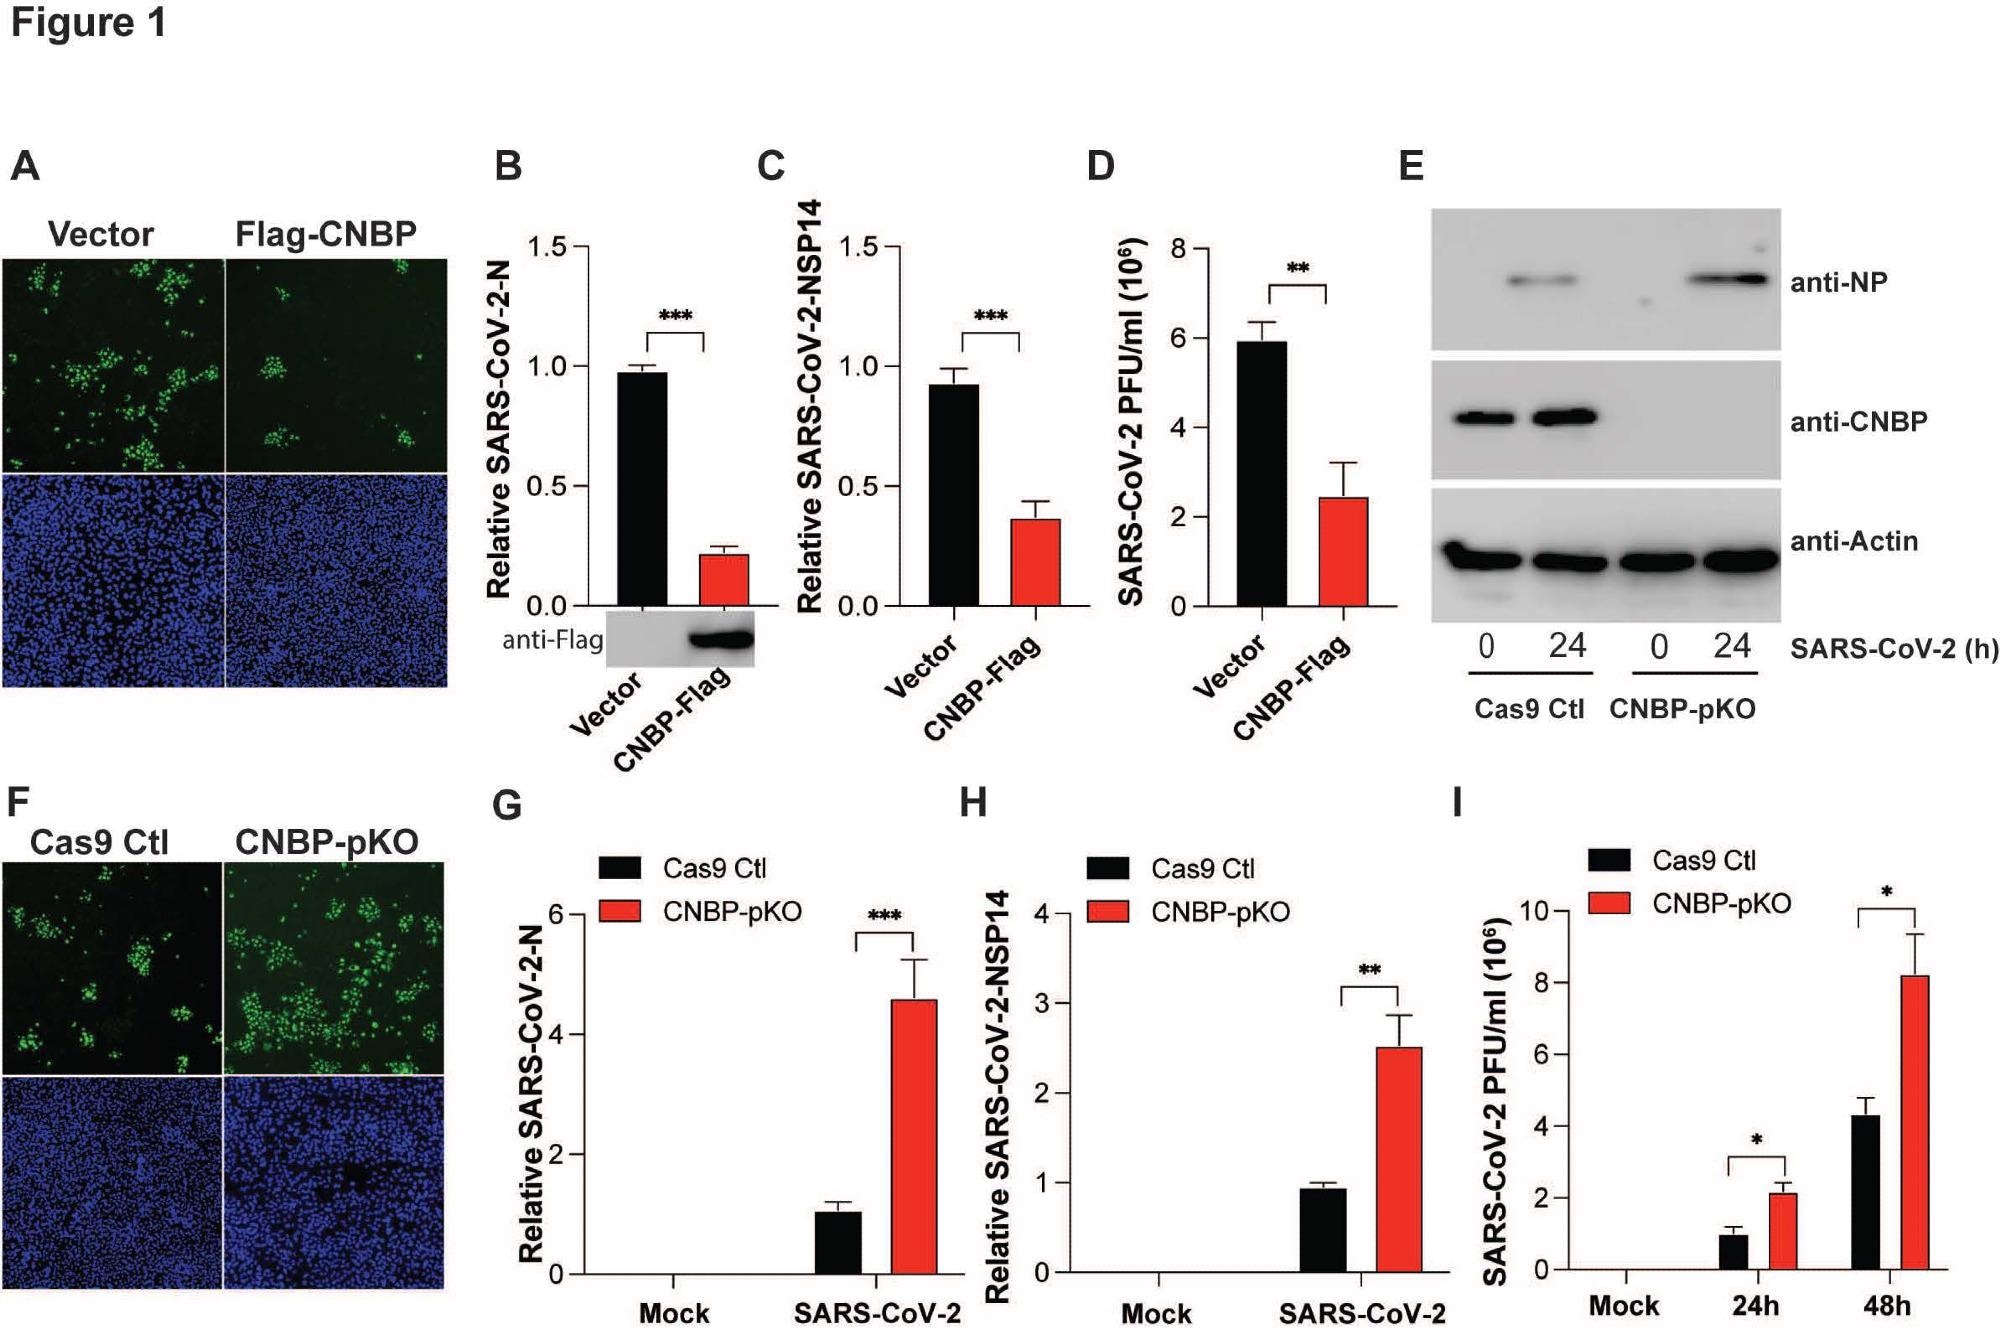 ​​​​​​​CNBP inhibits SARS-CoV-2 replication in vitro (A) hACE2-A549 cells were transfected with a Flag-CNBP expression plasmid or control, infected with SARS-CoV-2 for 24 hrs, and dsRNA was visualized by immunofluorescence with anti-J2 antibody (green). (B-D) Normalized SARS-CoV-2 RNA levels of NP (B) and NSP14 (C) as well as the SARS-CoV-2 titers (D) in hACE2-A549 cells transfected with Flag-CNBP plasmid and infected with SARS-CoV-2. (E-I) CNBP pKO and Cas9 Ctl A549 cells were infected with SARS CoV-2 at an MOI of 0.01. At 24 h post-infection, western blotting with viral NP protein expression (E), immunofluorescence staining with anti-J2 antibody (F), qPCR analysis of vRNA levels of NP (G) and NSP14 (H) as well as the viral titers assessed by plaque assay (I) in the supernatants were determined.